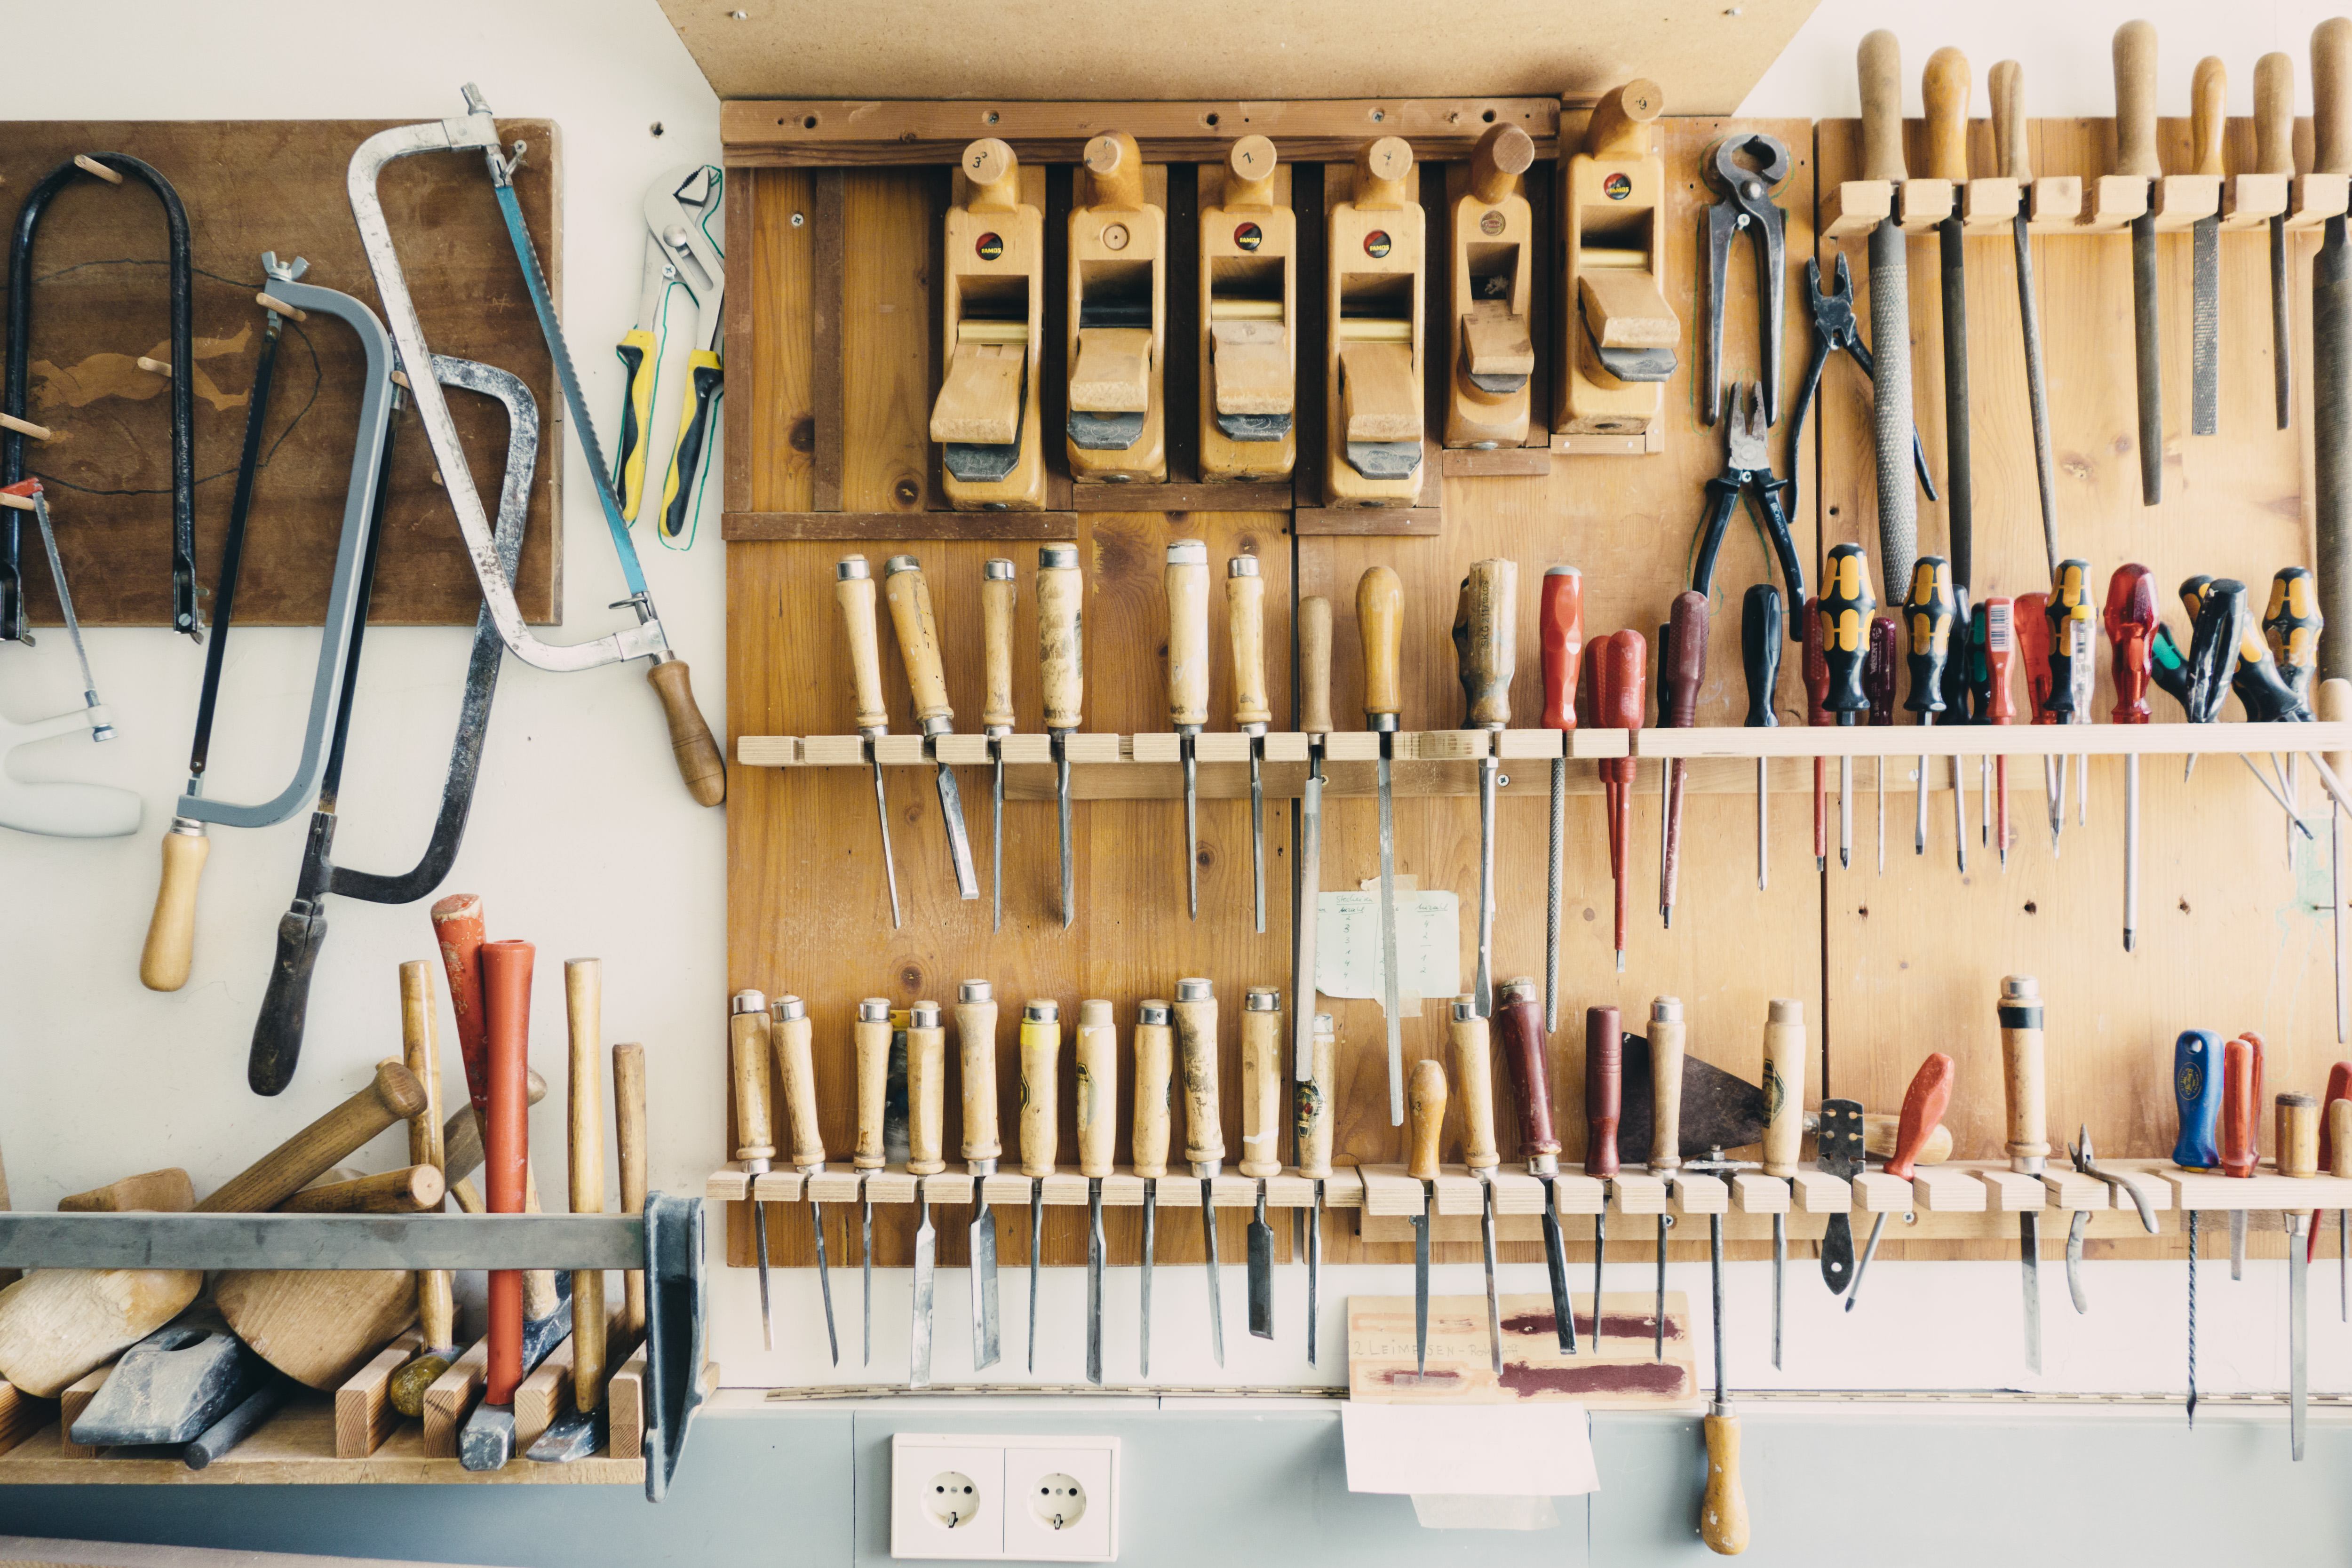 5 Home Improvements You Should Leave to the Professionals